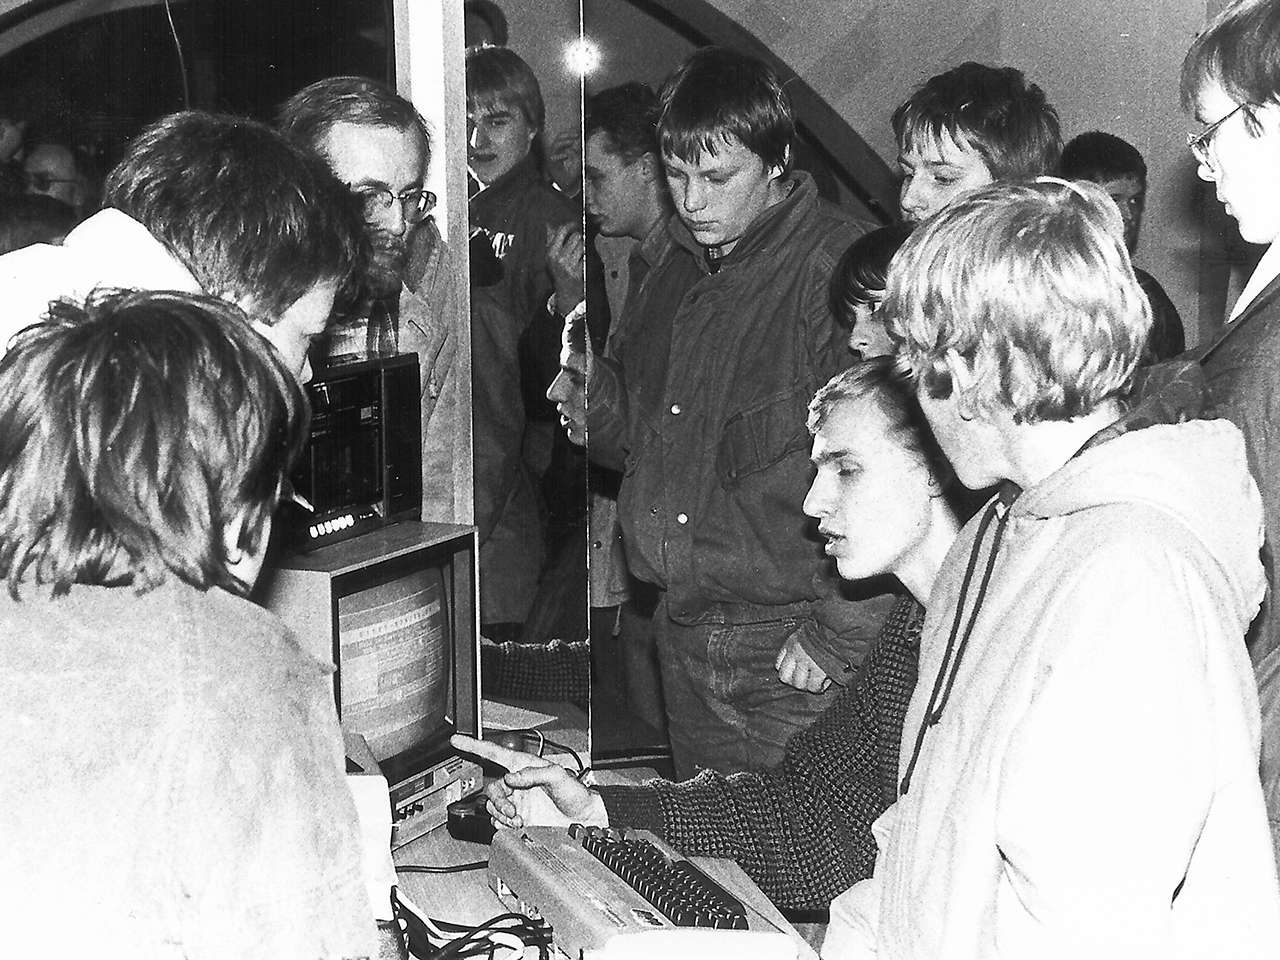 Visitors of the first PUBLIC DOMAIN look intently at a computer screen